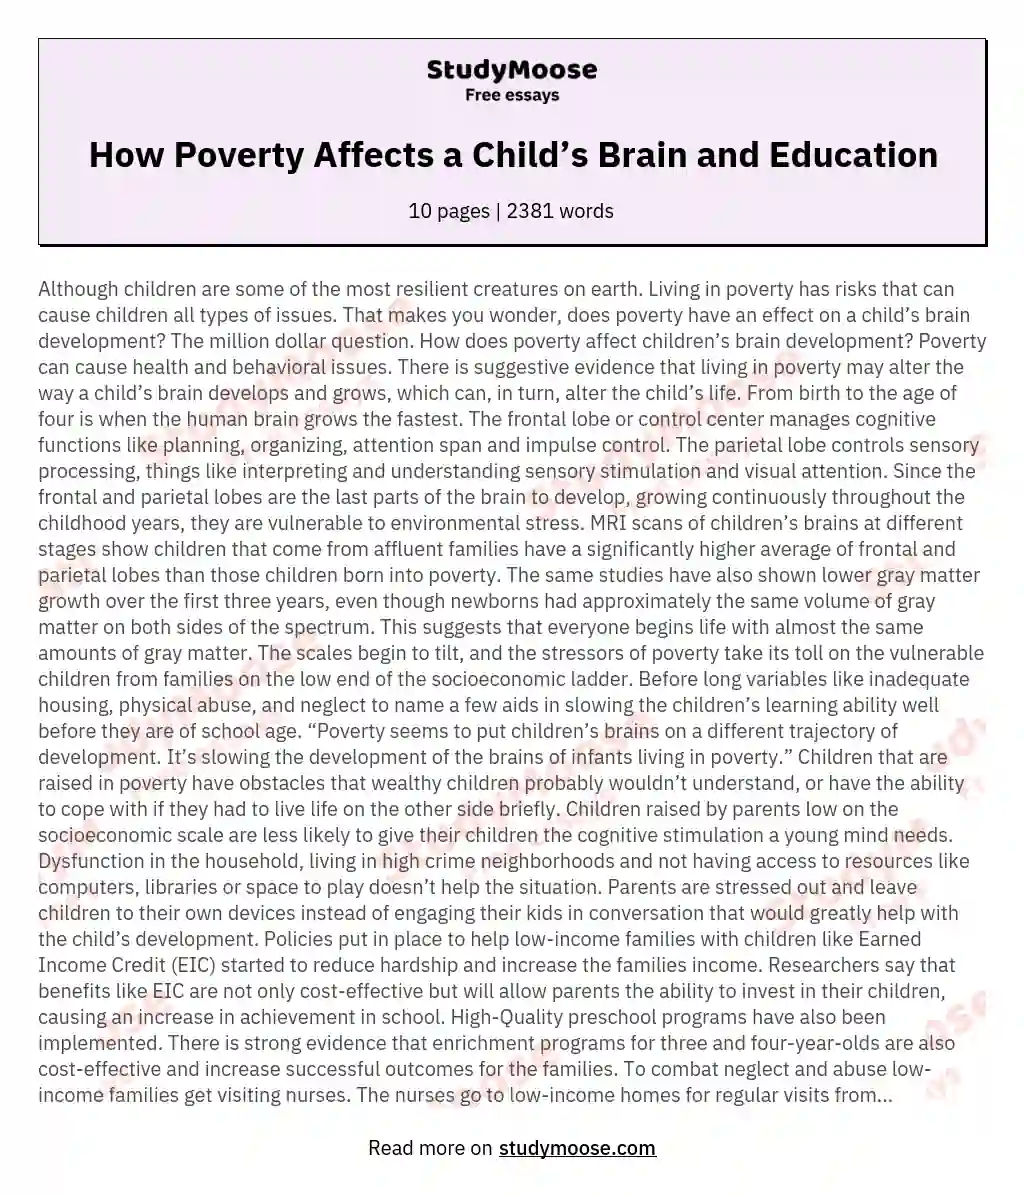 How Poverty Affects a Child’s Brain and Education essay